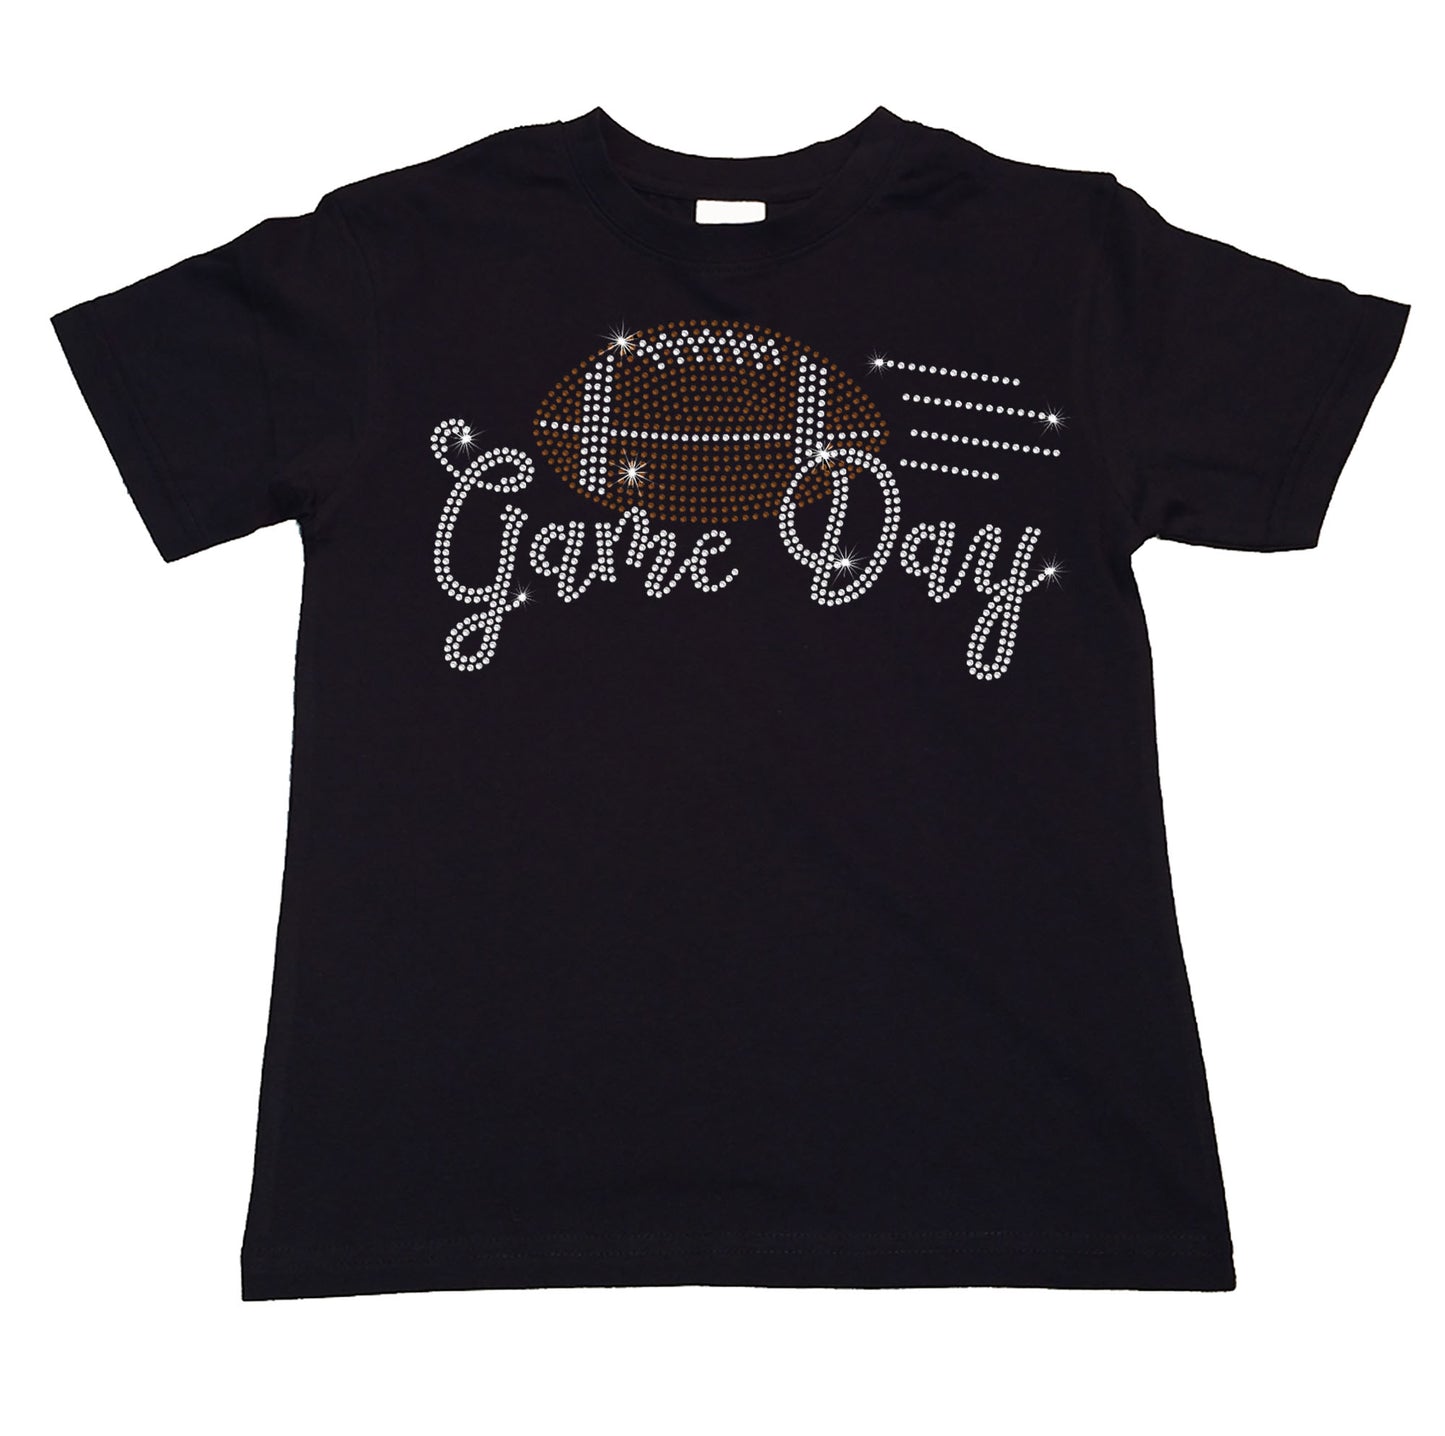 Girls Rhinestone T-Shirt " Game Day Football in Rhinestones " Kids Size 3 to 14 Available